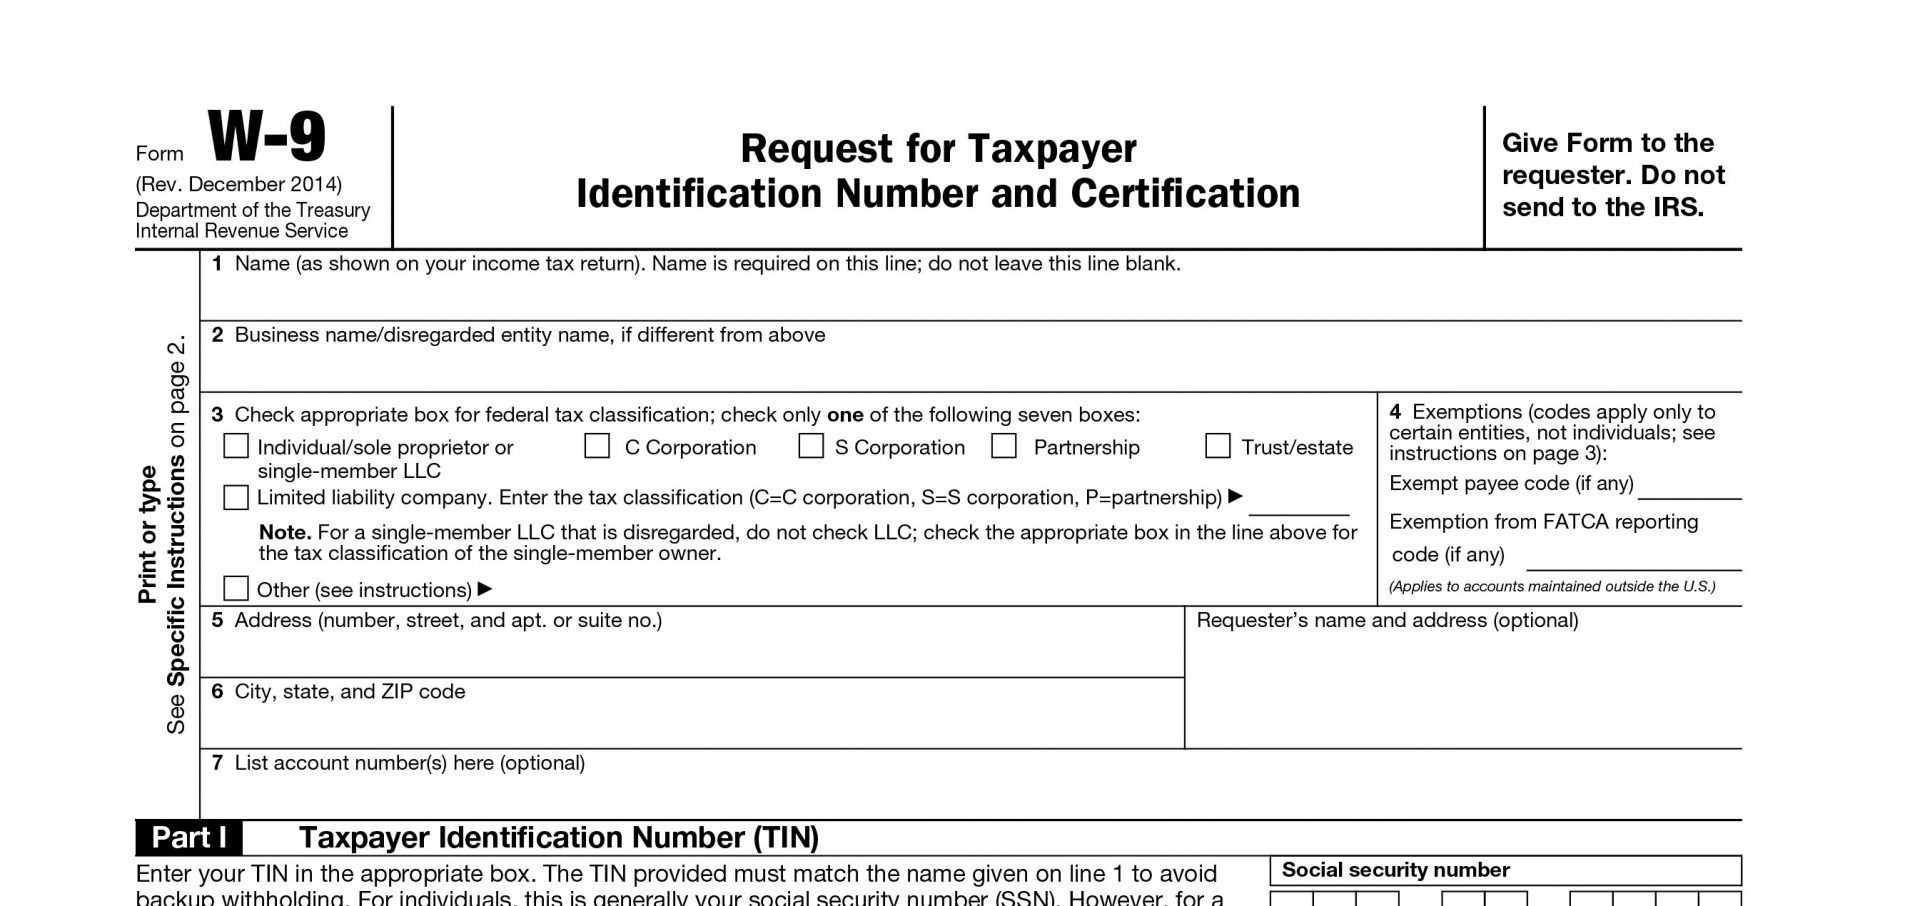 Printable Irs W-9 Blank 2019 - 2020 For Free Use-W-9 Tax Form Blank 2020